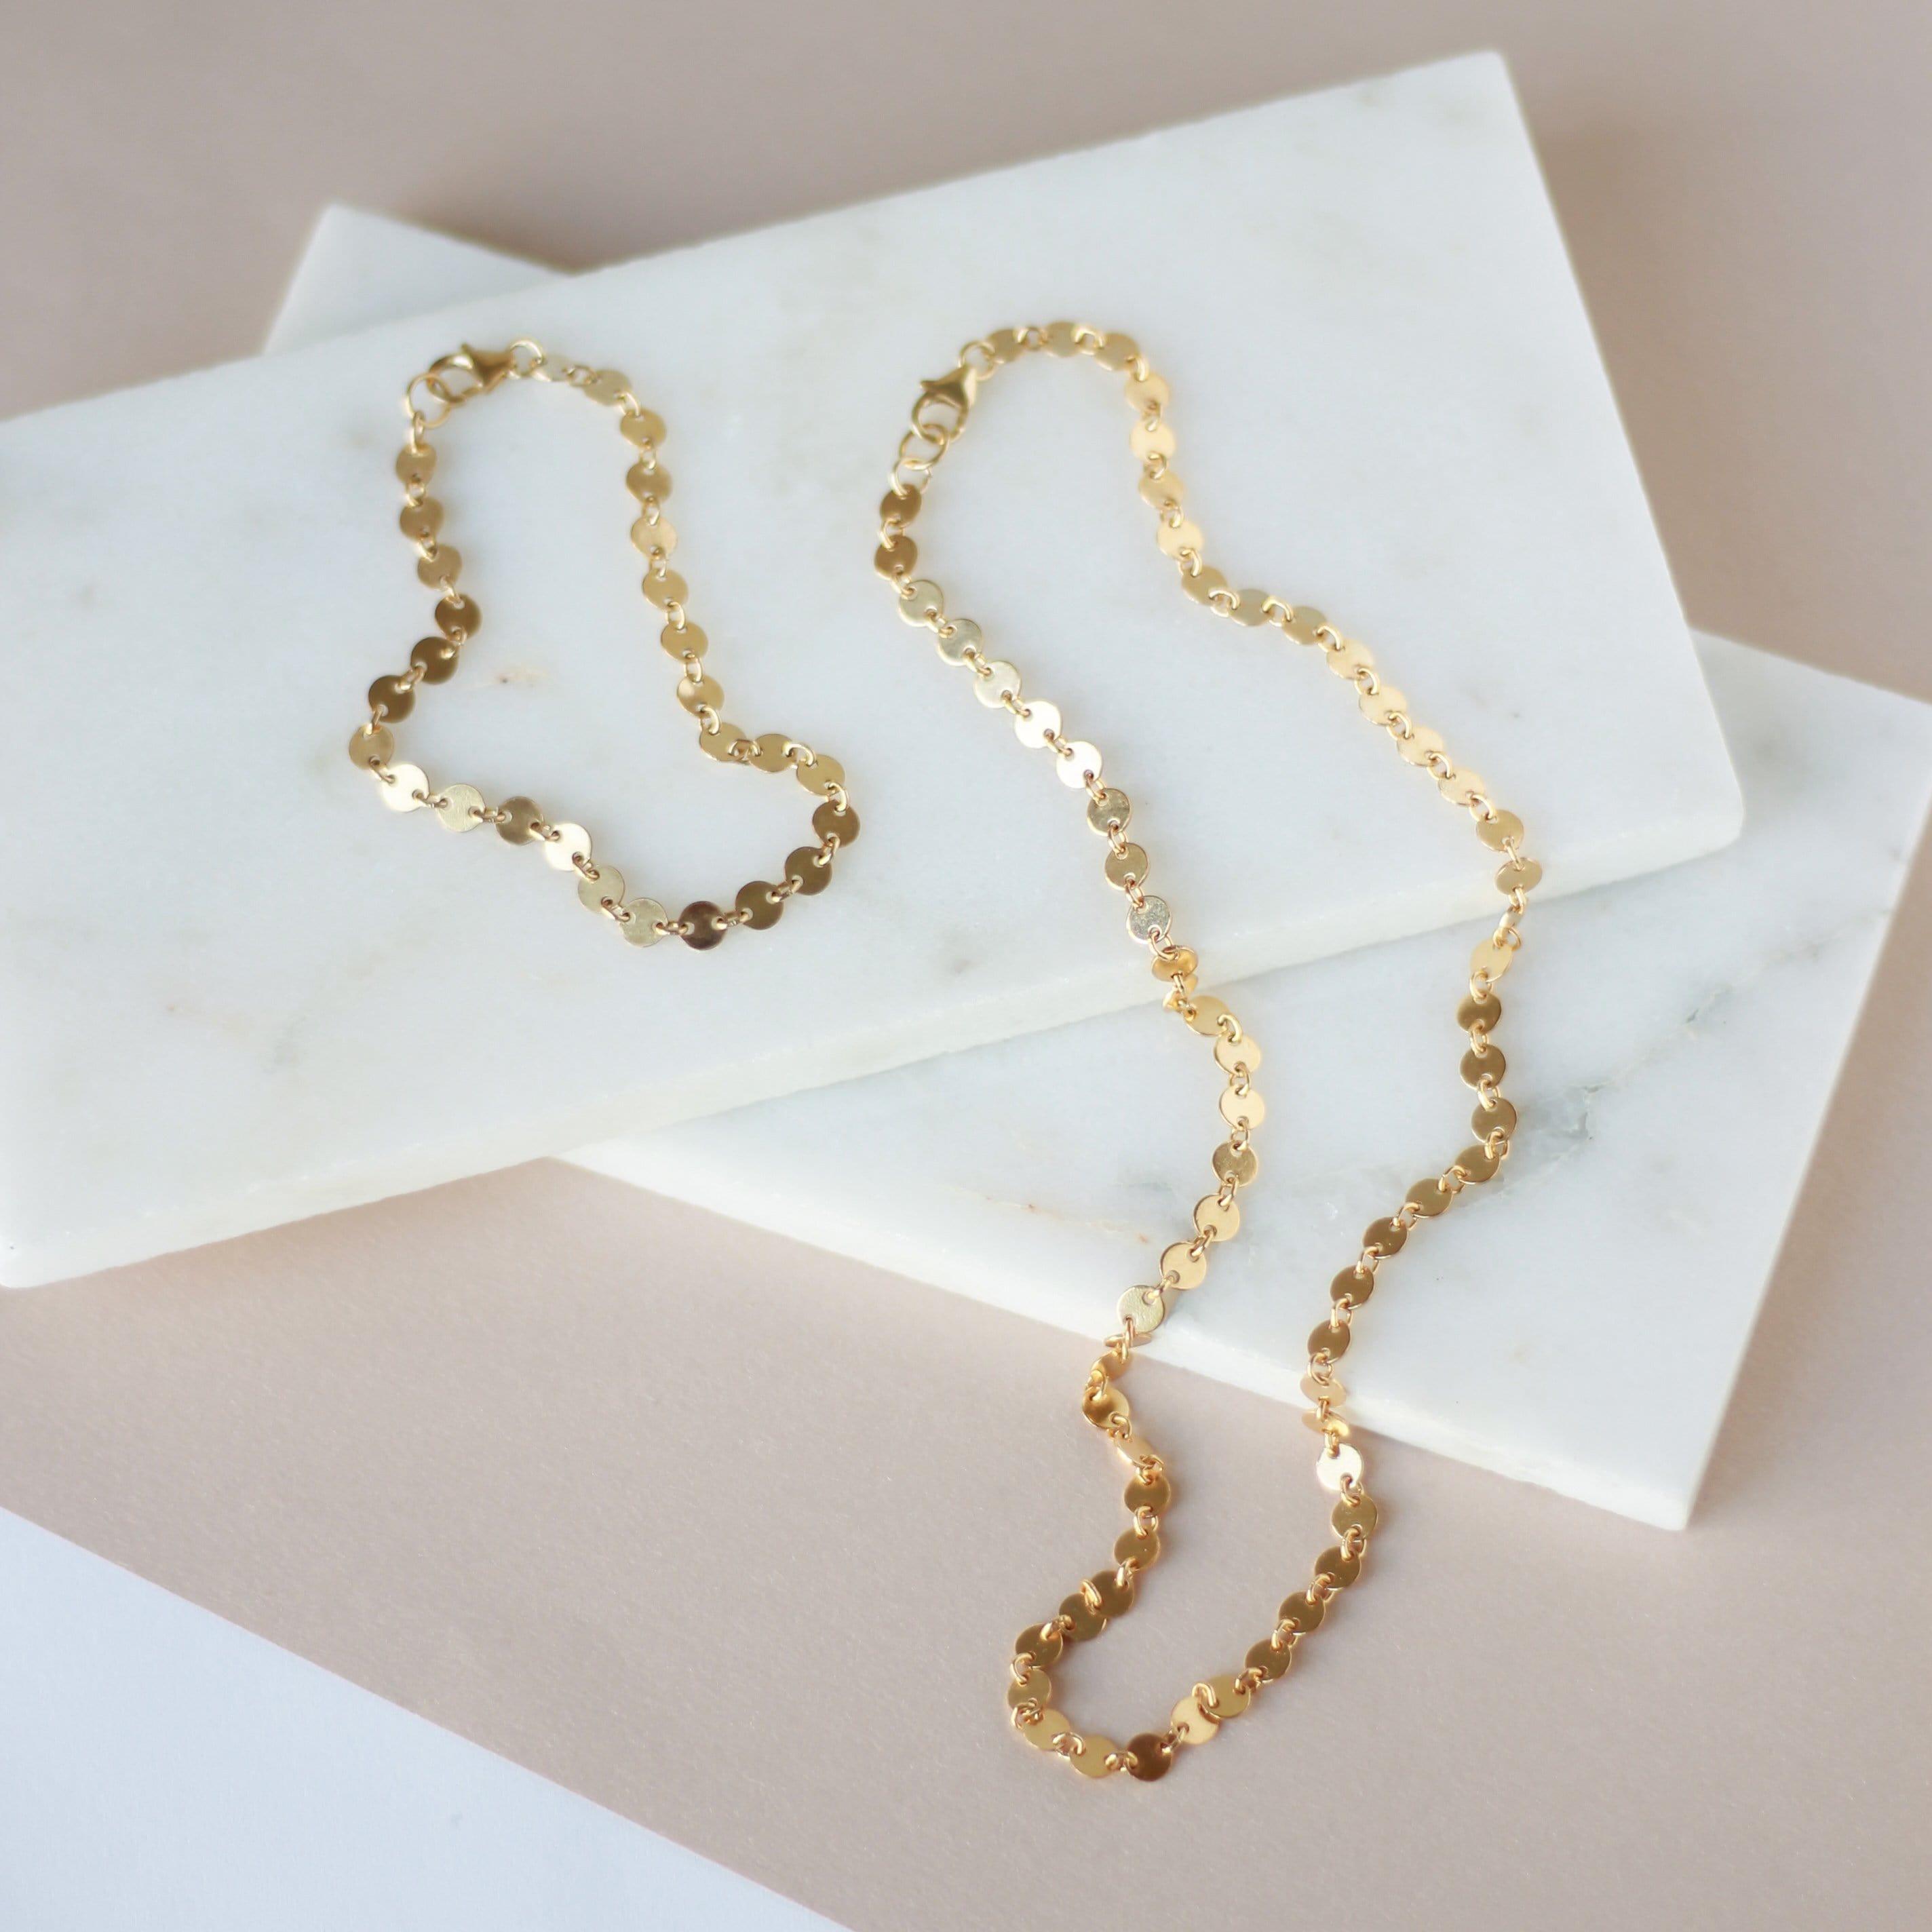 Sequin Chain Bracelet - Nolia Jewelry - Meaningful + Sustainably Handcrafted Jewelry